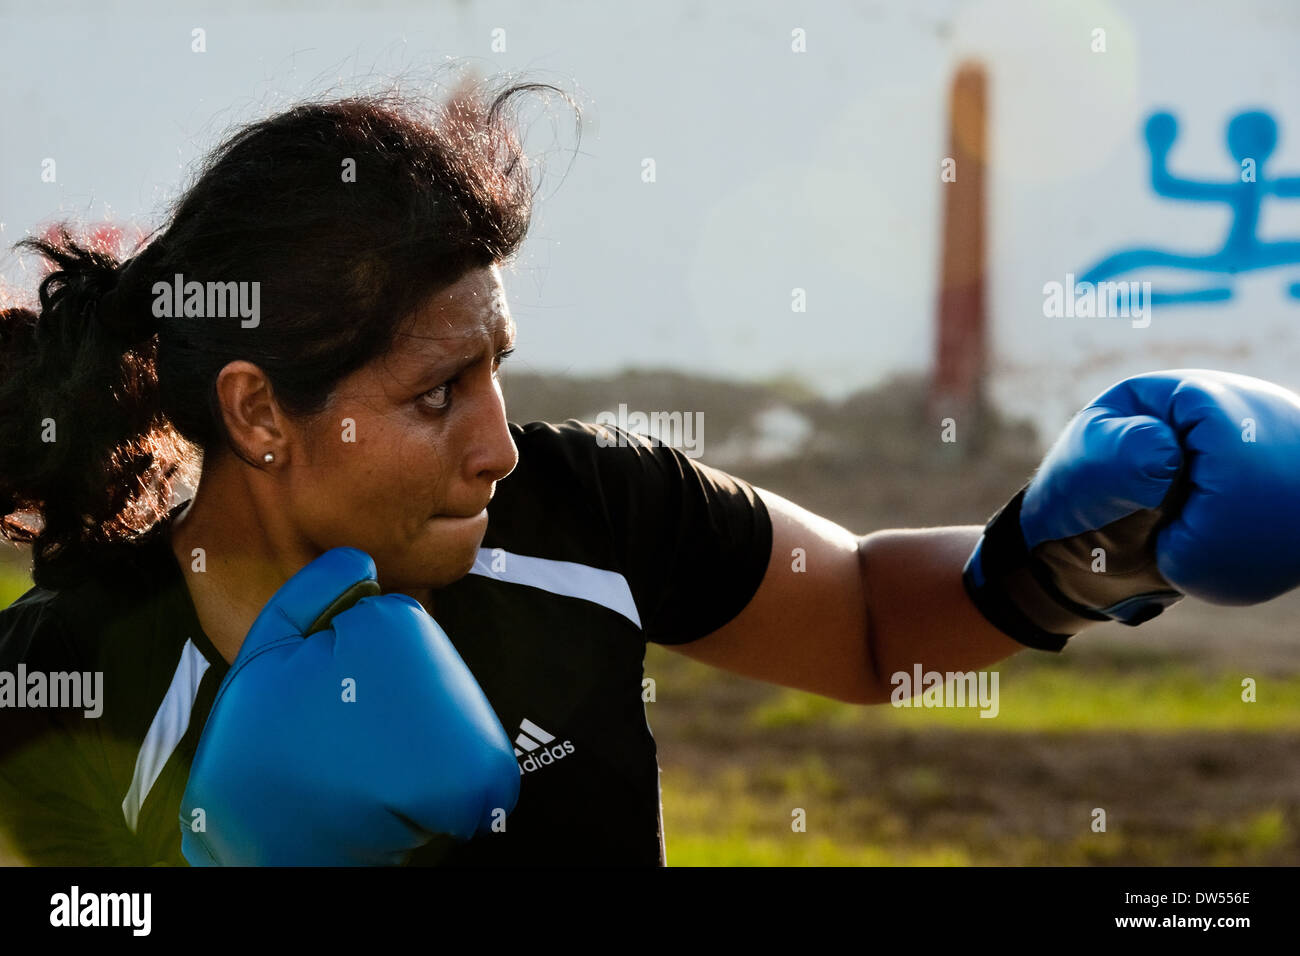 A Peruvian woman practices punching while training in the outdoor boxing school in Callao, Peru. Stock Photo